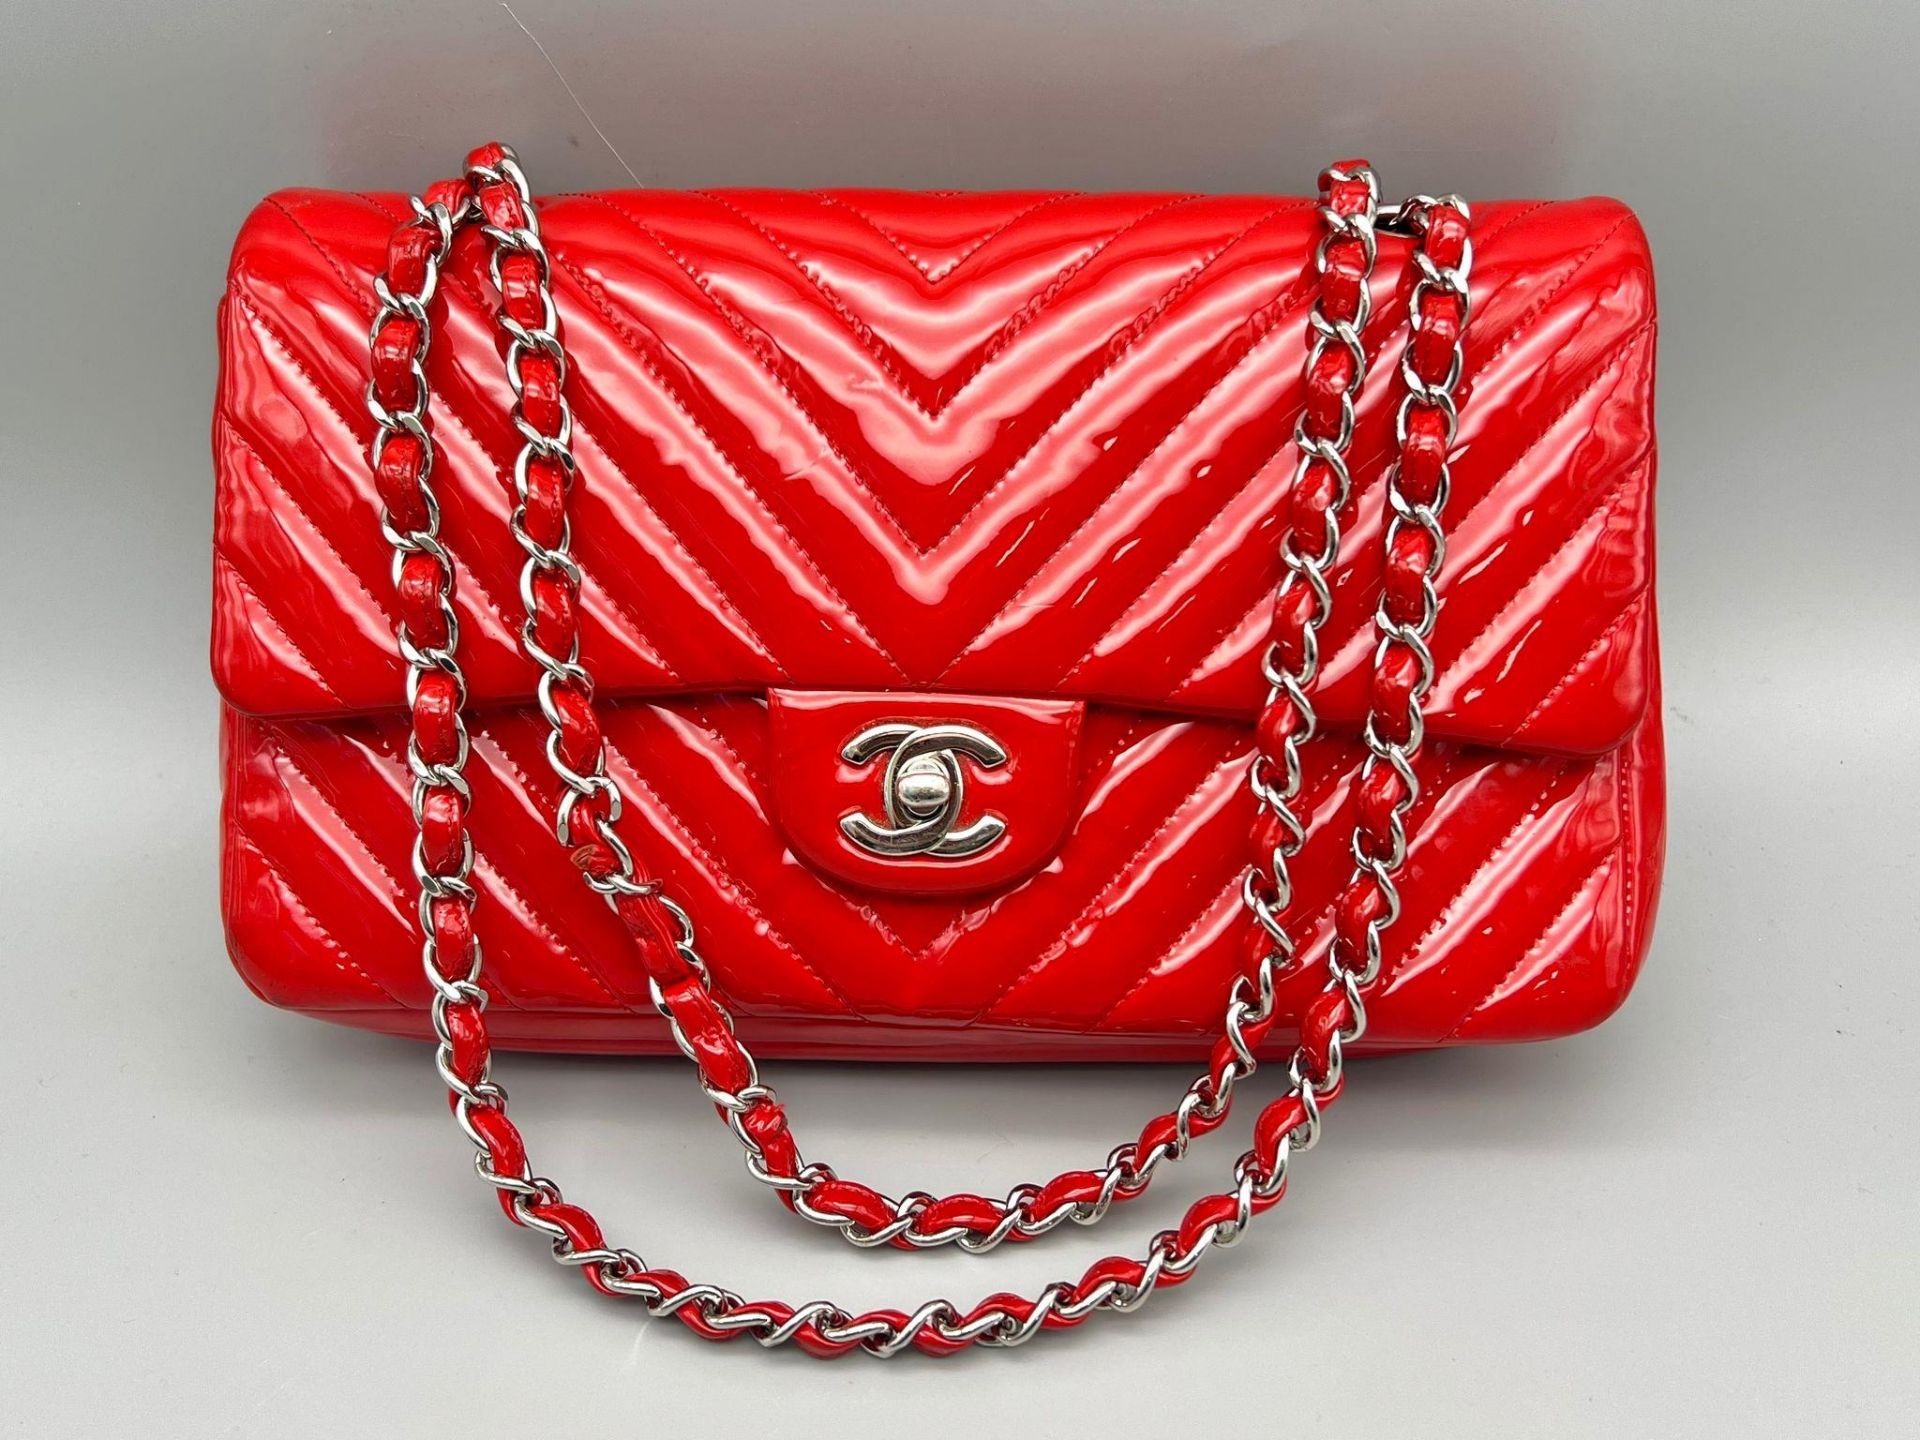 A Chanel Patent Leather Flap Handbag. Bright red patent leather quilted exterior. Classic Chanel